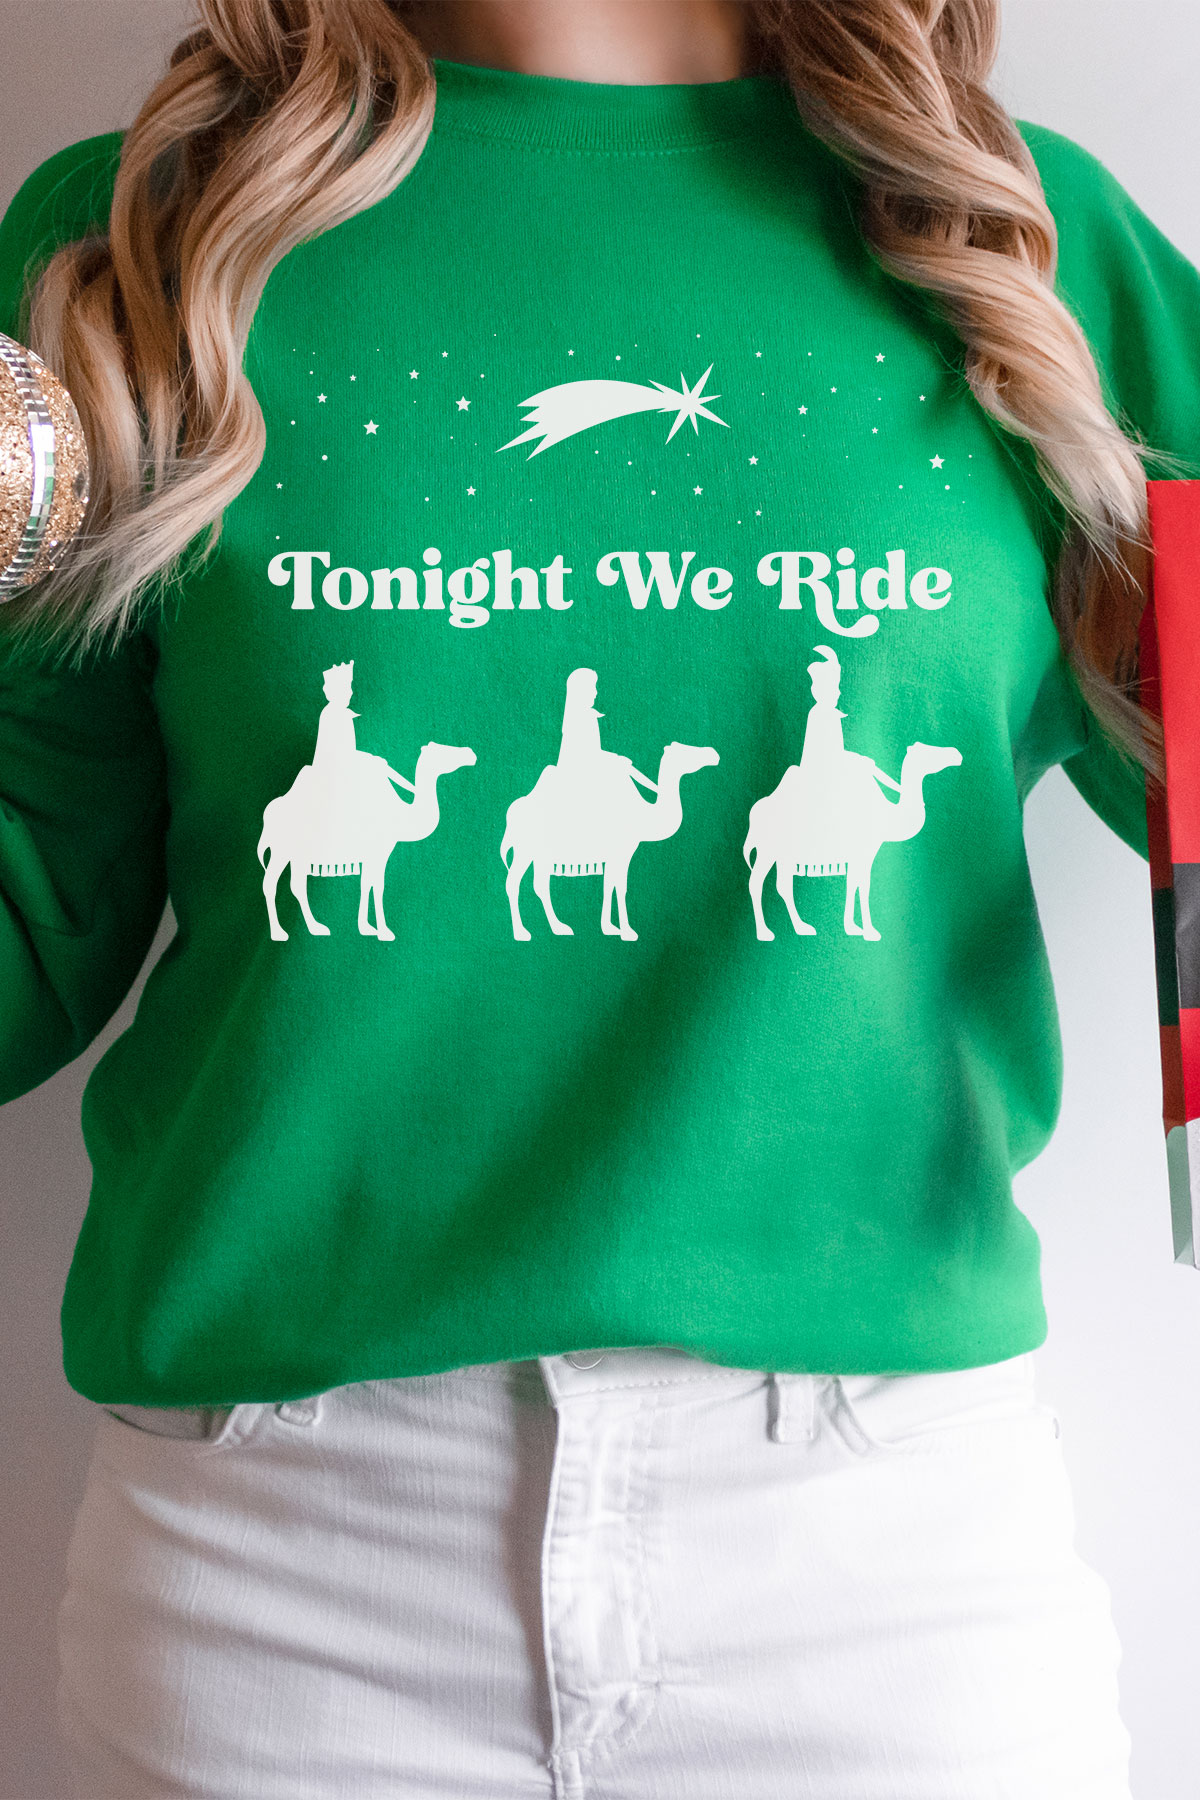 This is one of the free funny Christmas shirts you can make with the free SVGs from the post. This one says Tonight We Ride with the picture of 3 wisemen.